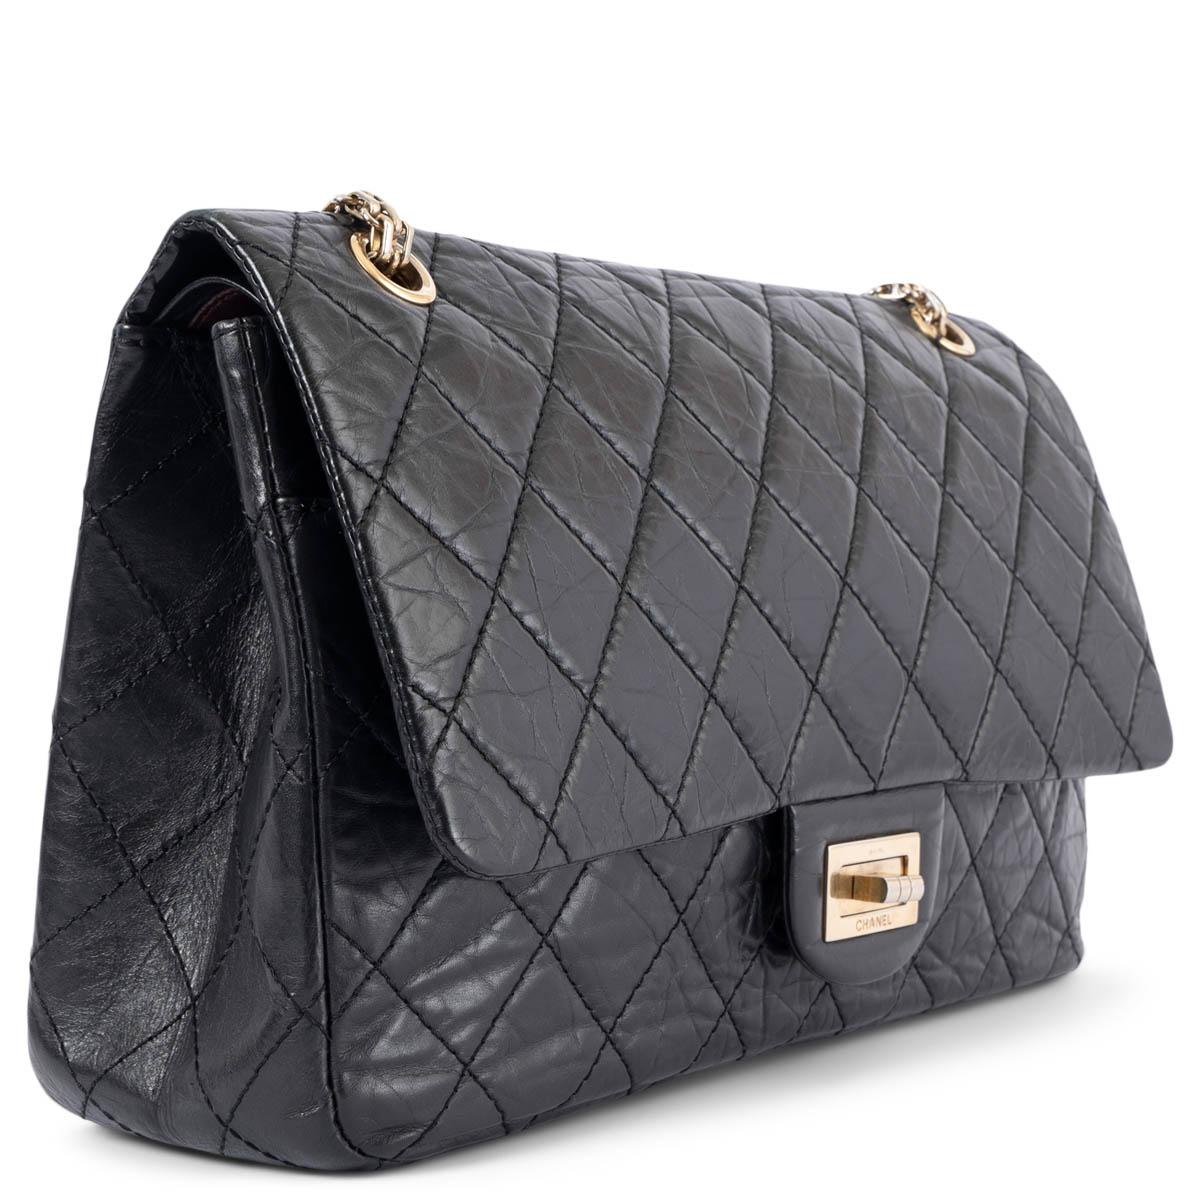 100% authentic Chanel 2.55 Reissue 227 double flap bag in black aged calfskin featuring classic diamond quilted stitchings. Opens with a turn-lock to a black and burgundy smooth calfskin interior with two patch pockets and one lipstick pocket